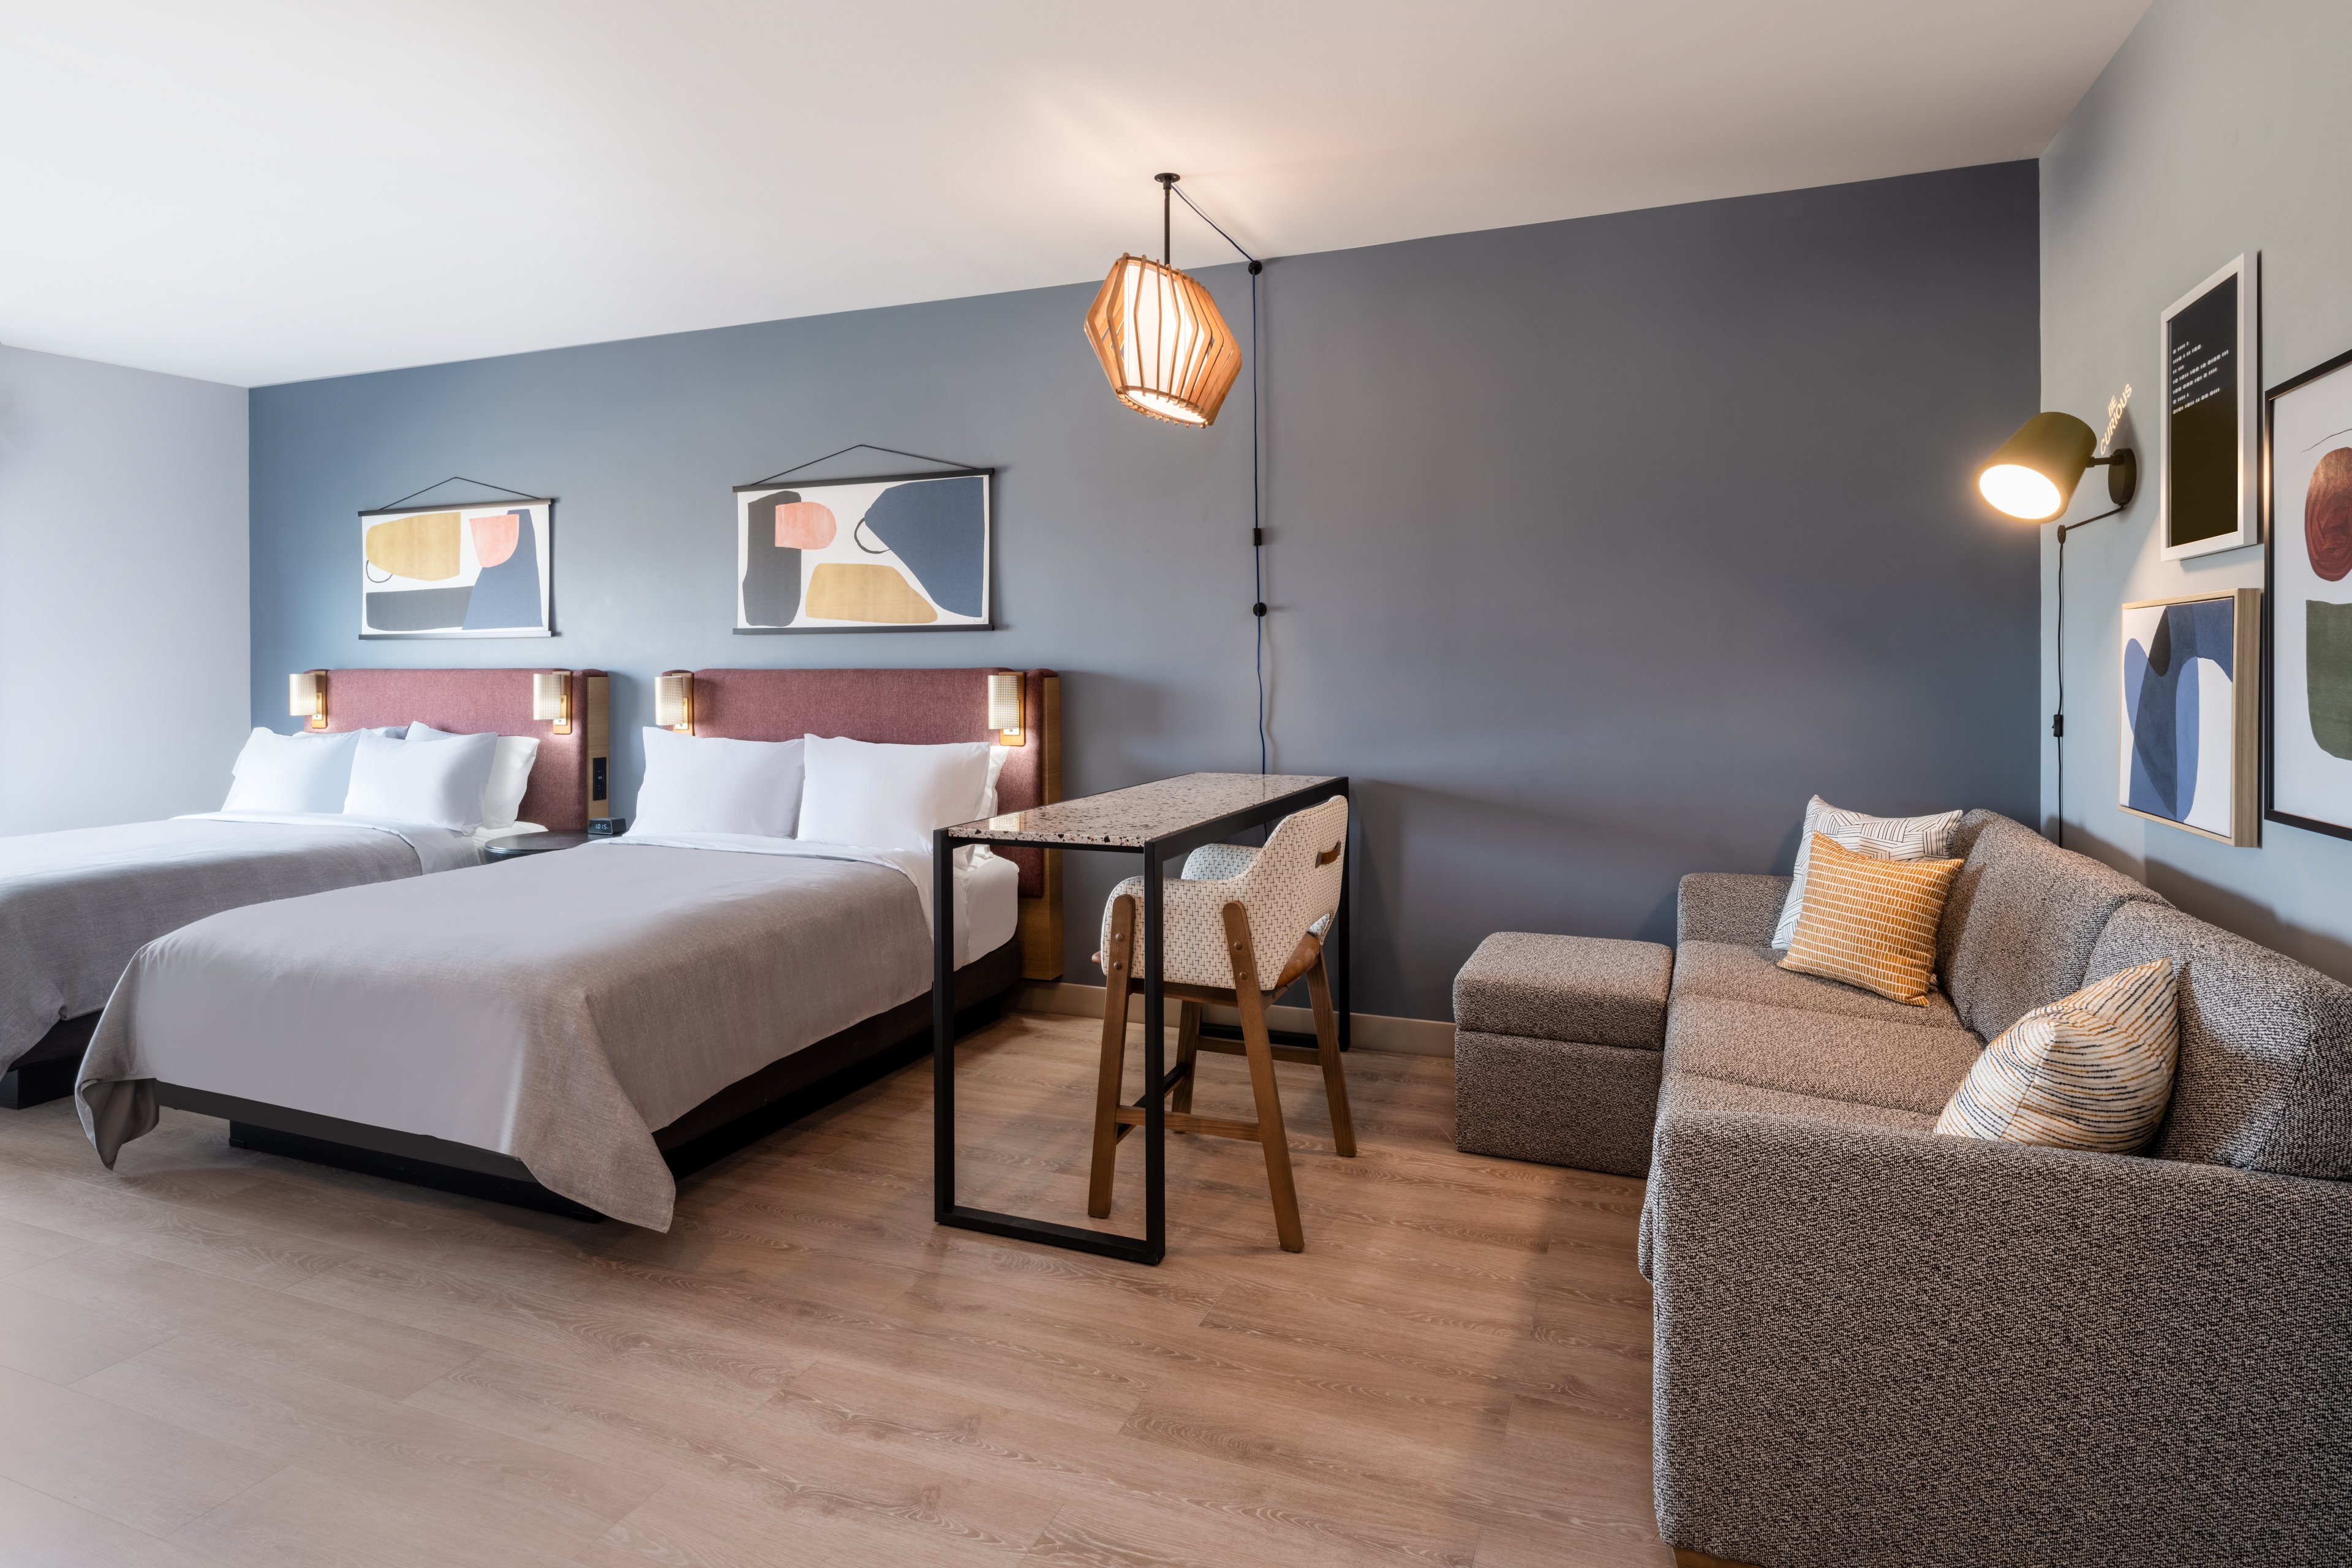 Our modern spacious suites are perfect for work, play and relaxing